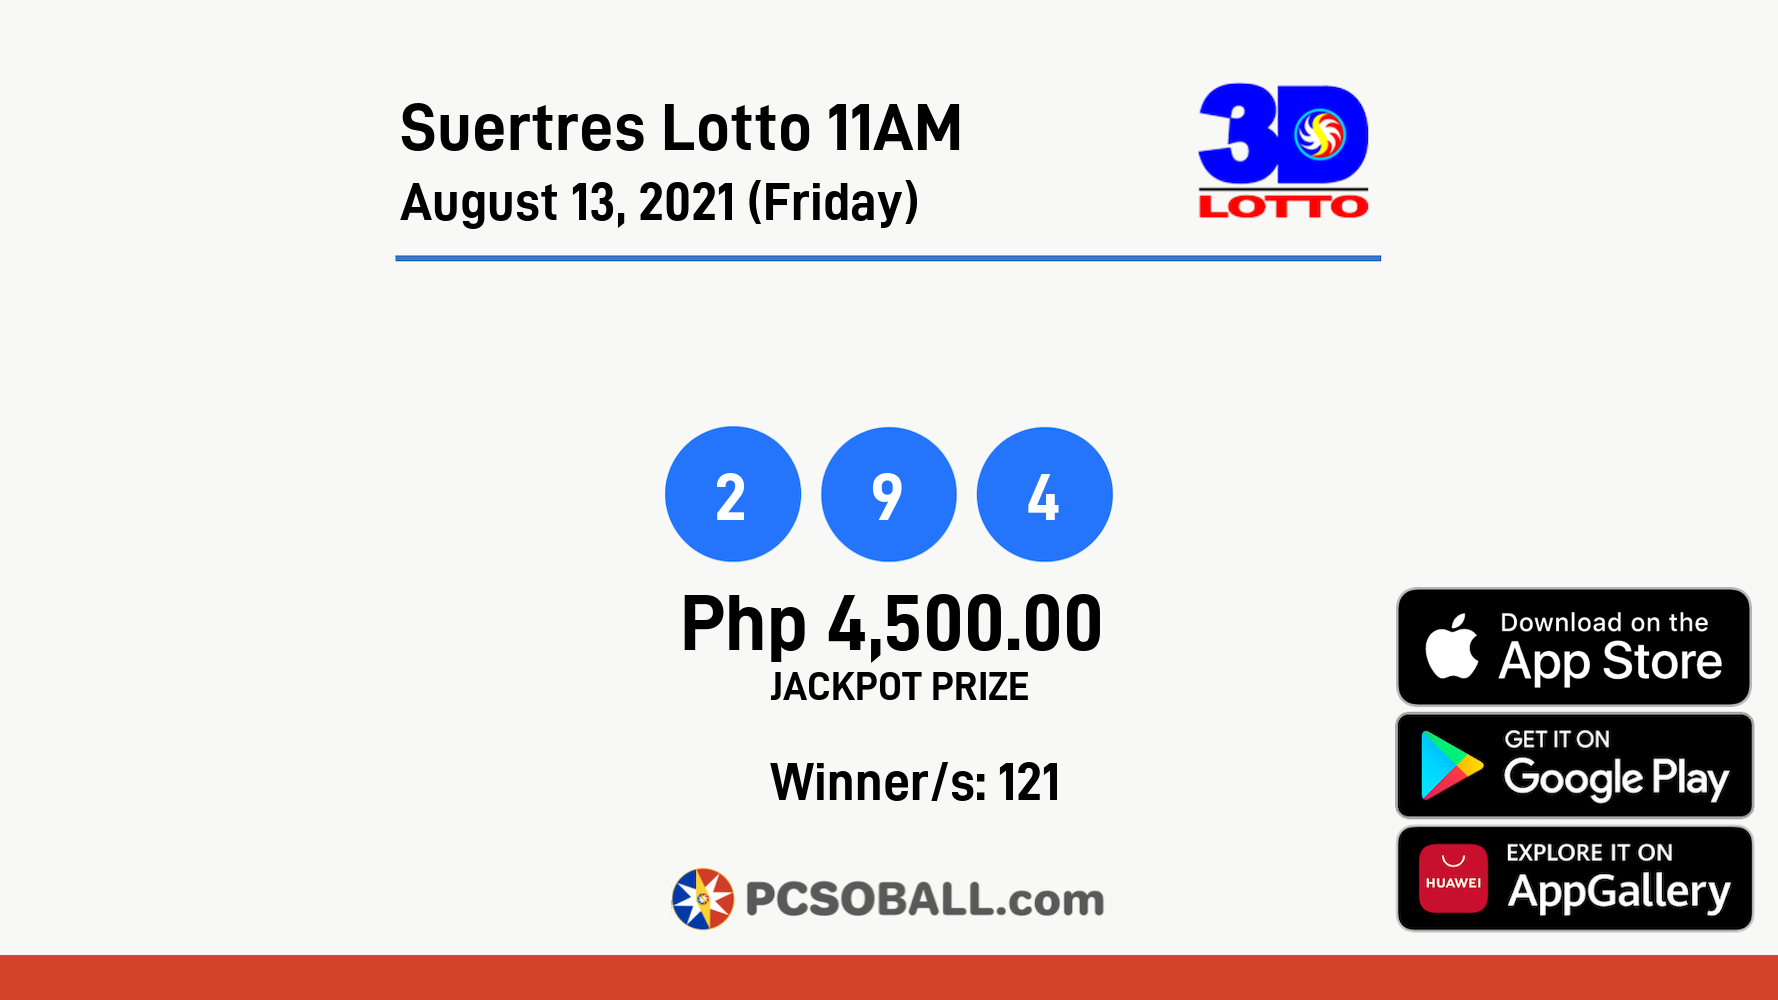 Suertres Lotto 11AM August 13, 2021 (Friday) Result